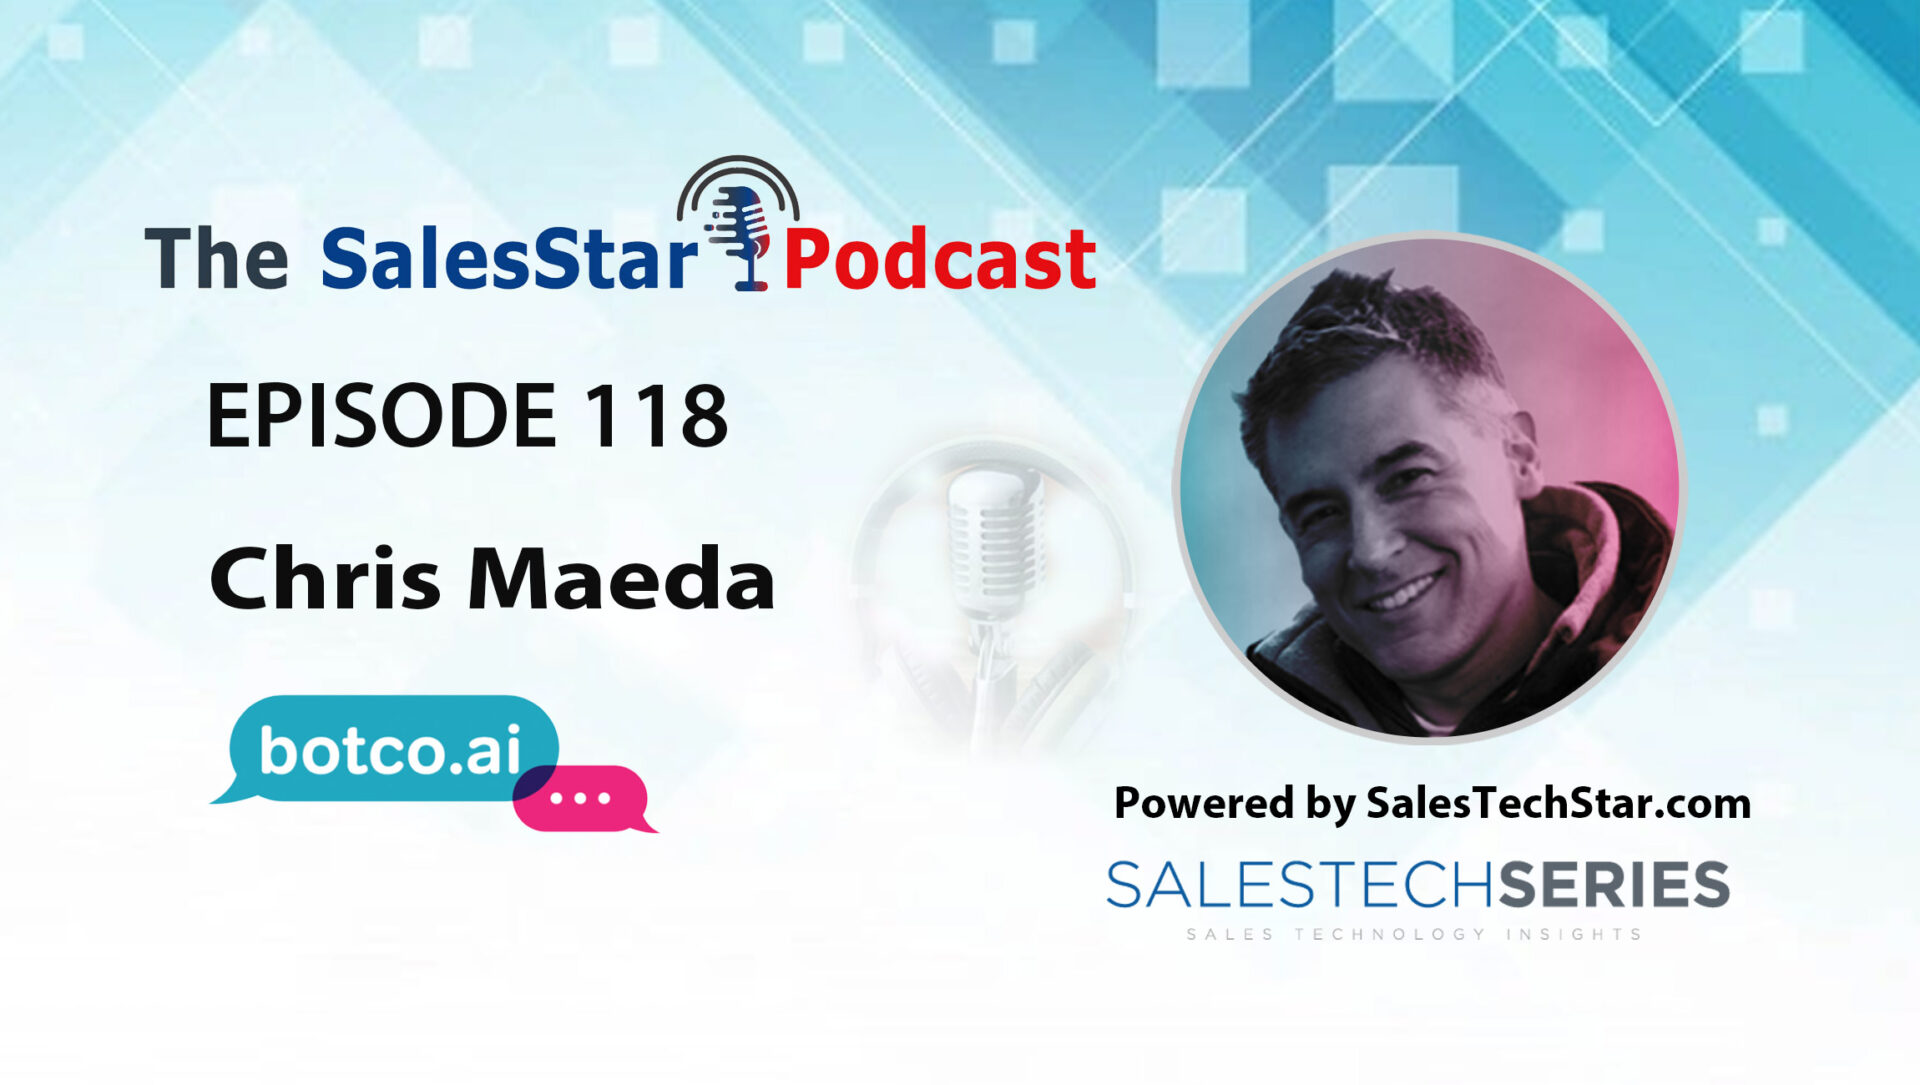 Episode 118: The Power of Chatbots in B2B Tech with Chris Maeda, co-founder and CTO at Botco.ai